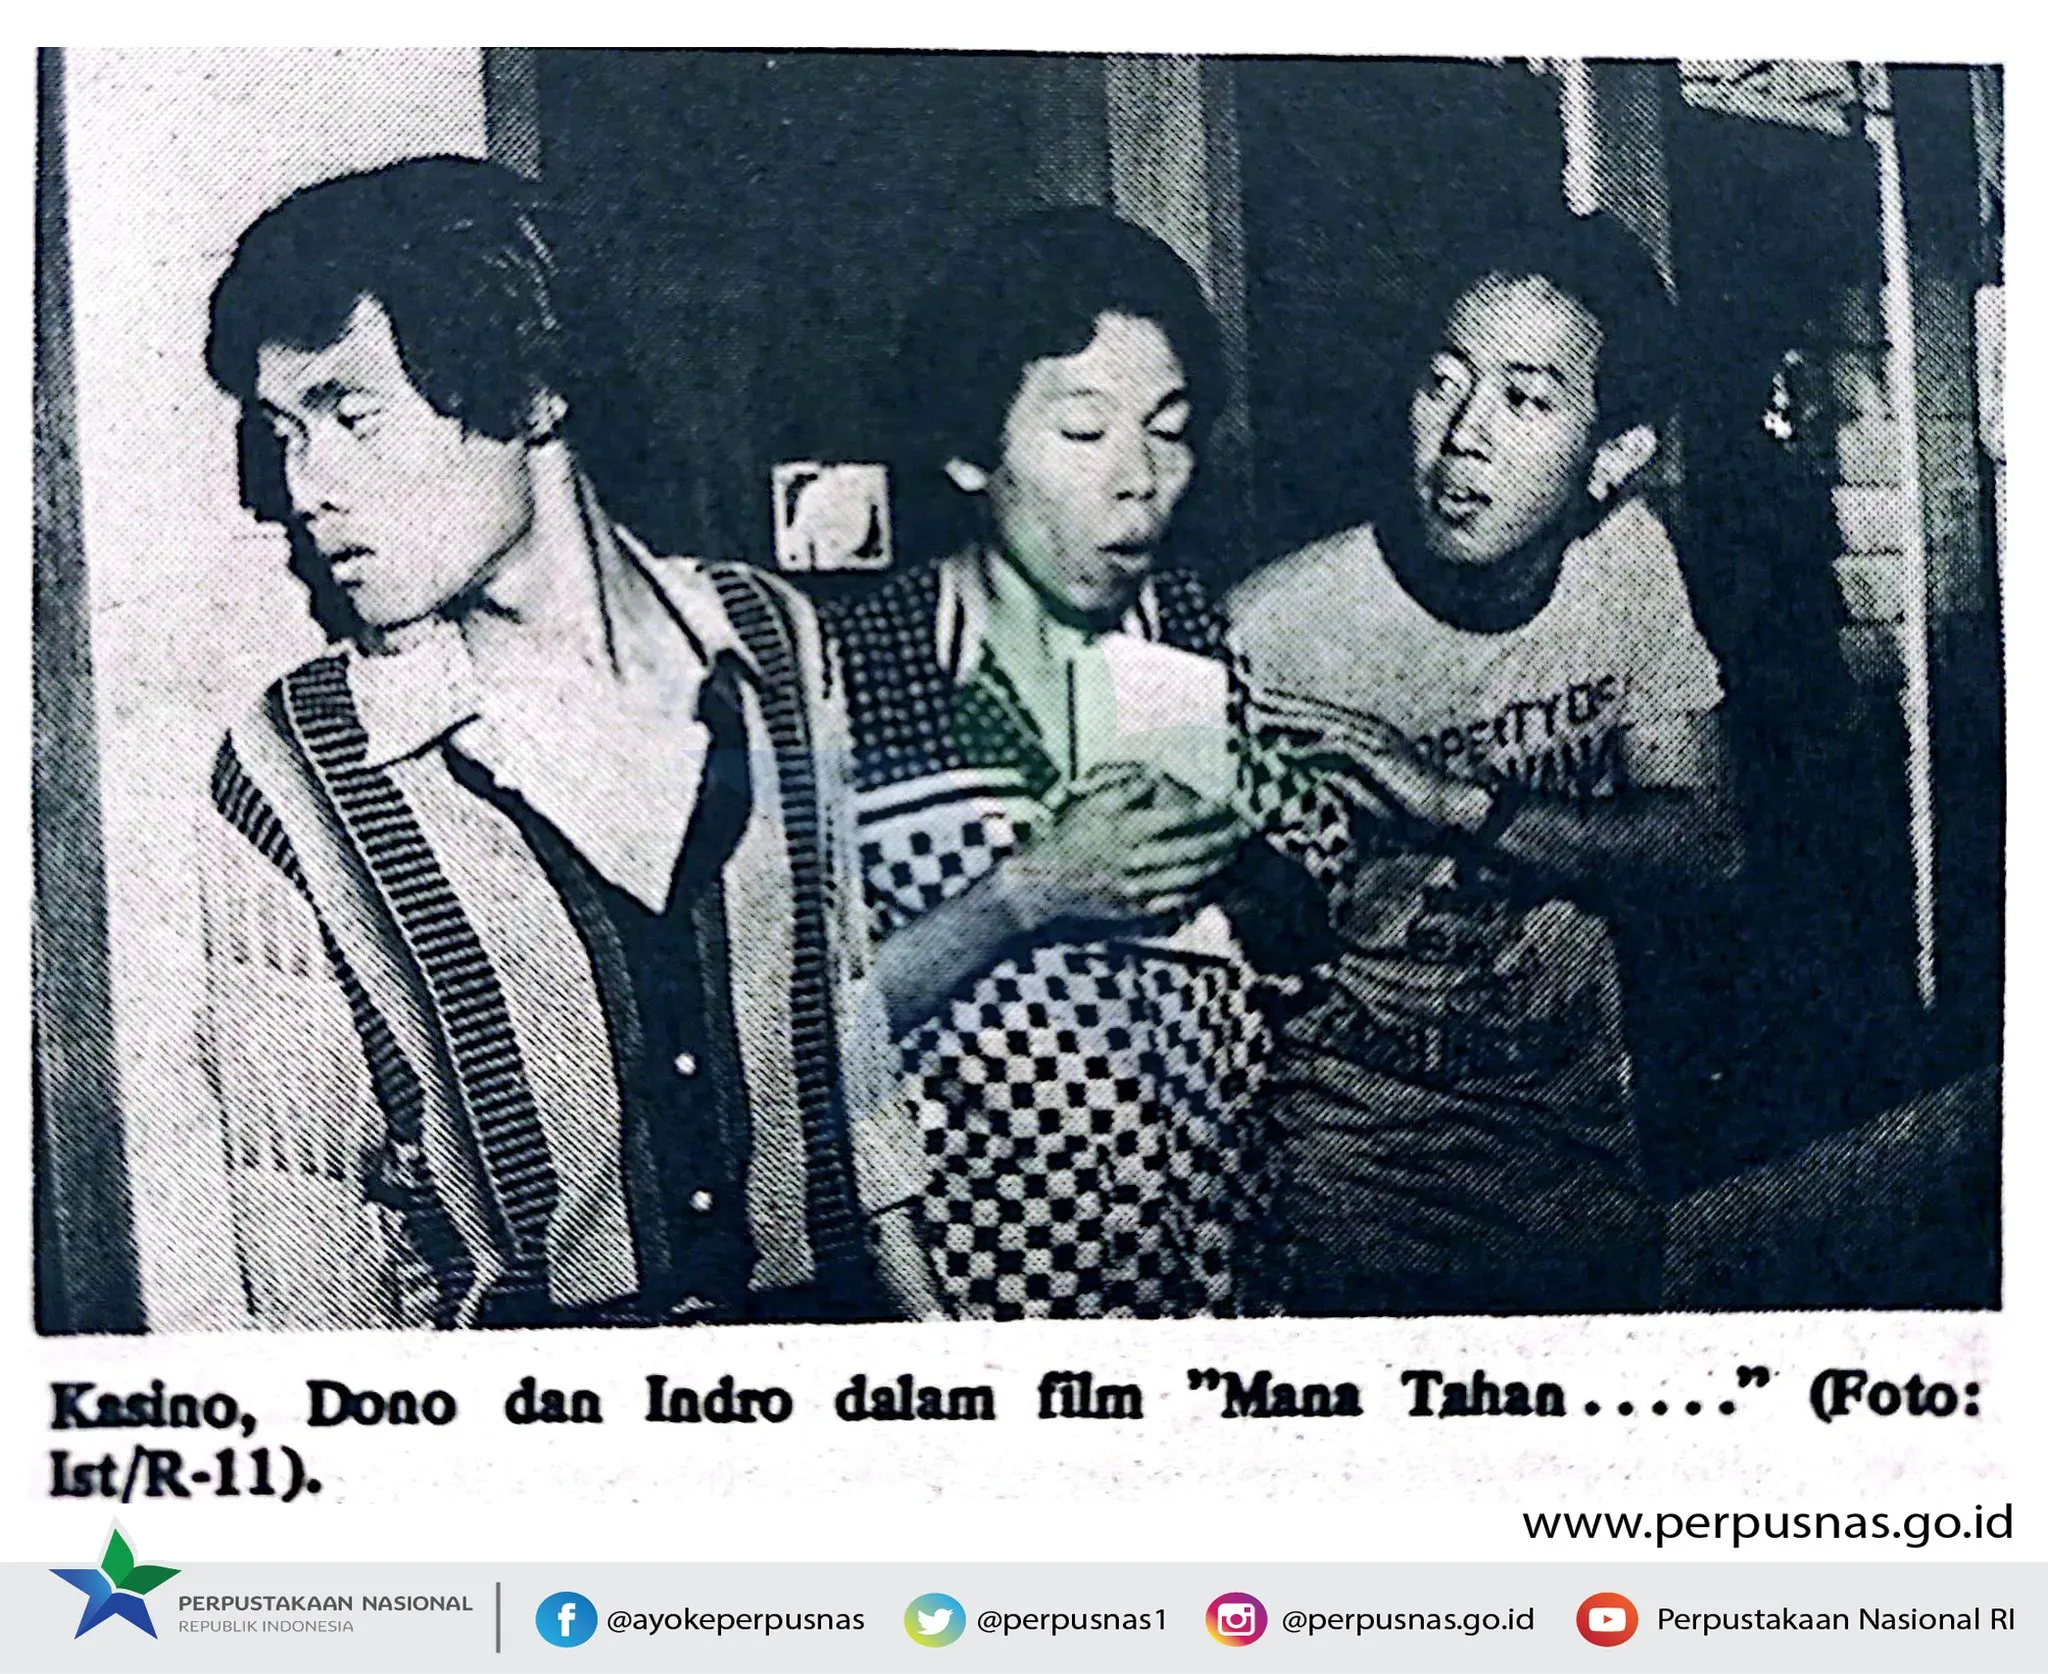 How Warkop DKI Became Synonymous with Eid al-Fitr